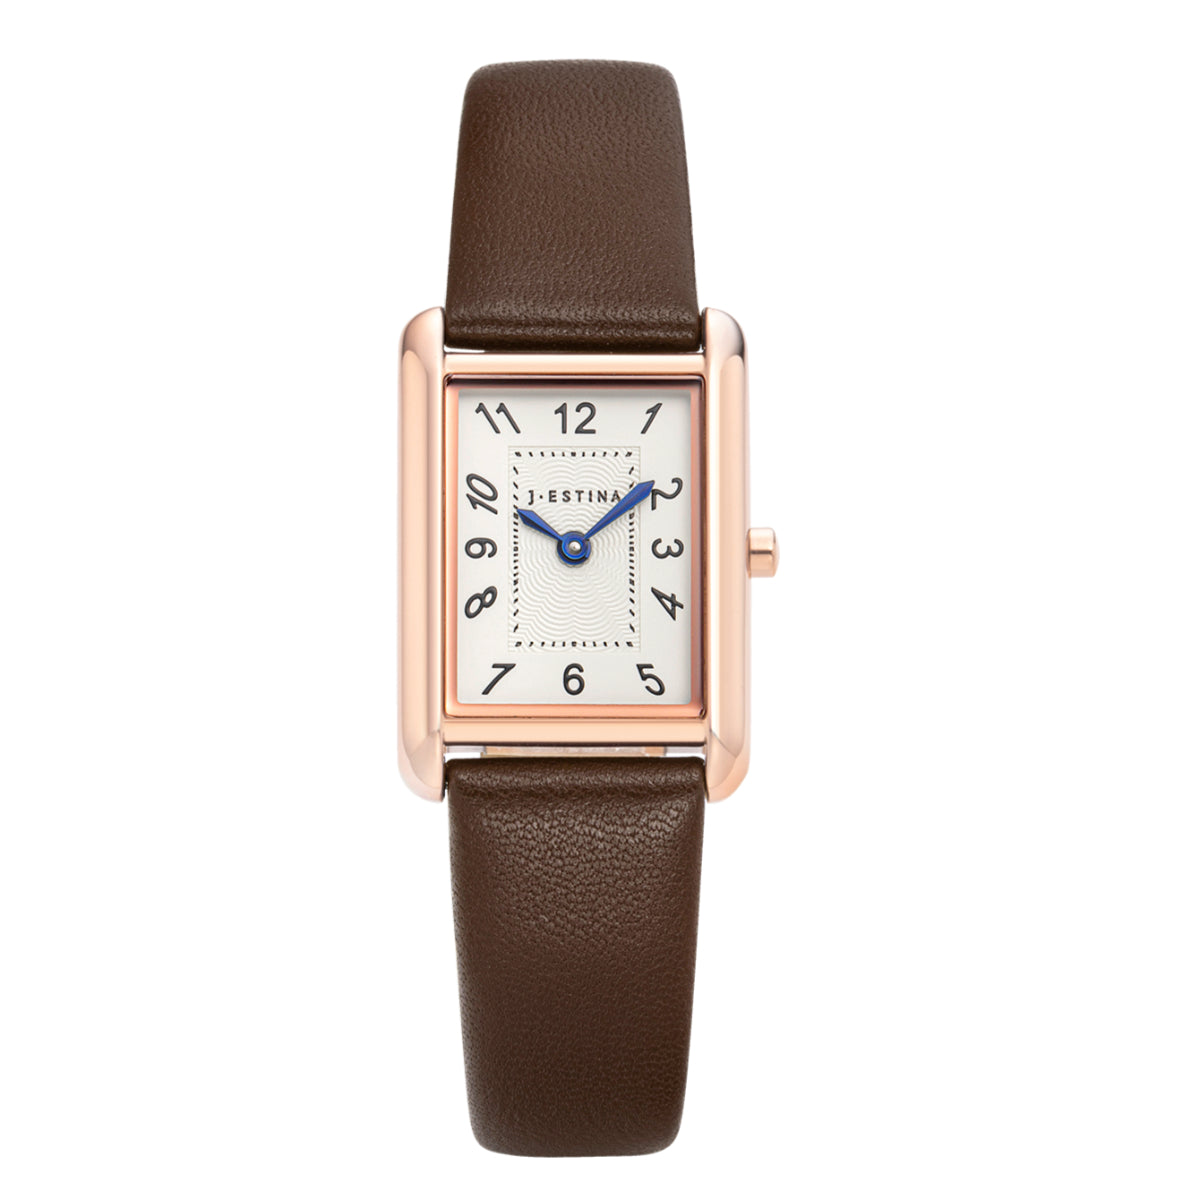 J.ESTINA Nuovo Tempo Leather Watch IU Pick Analog Watch Brown Gold Number Face Made in Korea / from Seoul, Korea